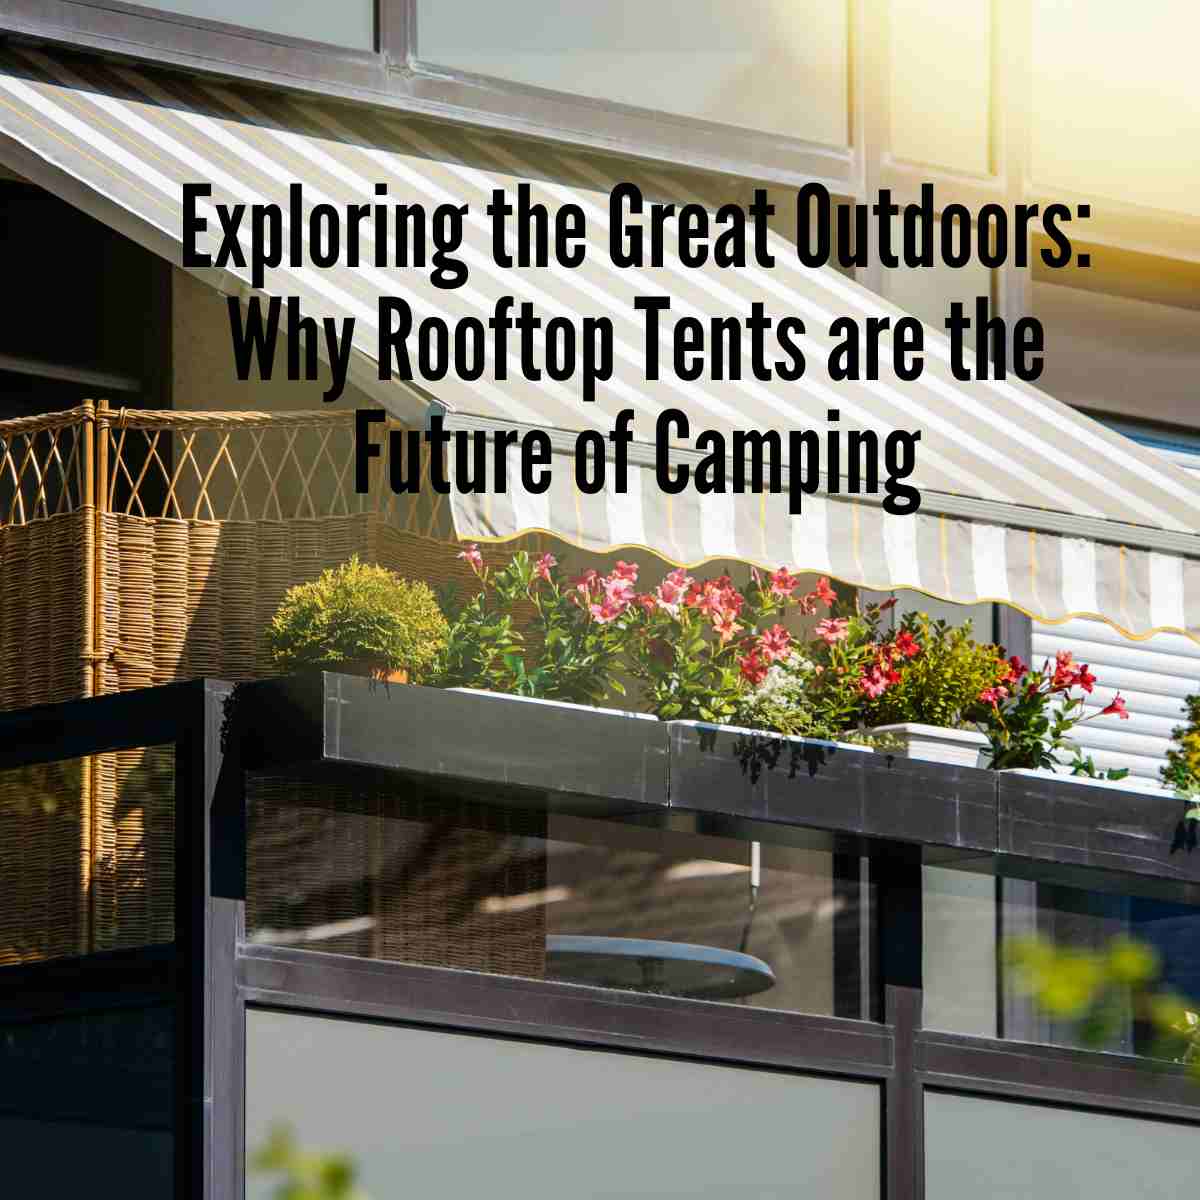 Why Rooftop Tents are the Future of Camping